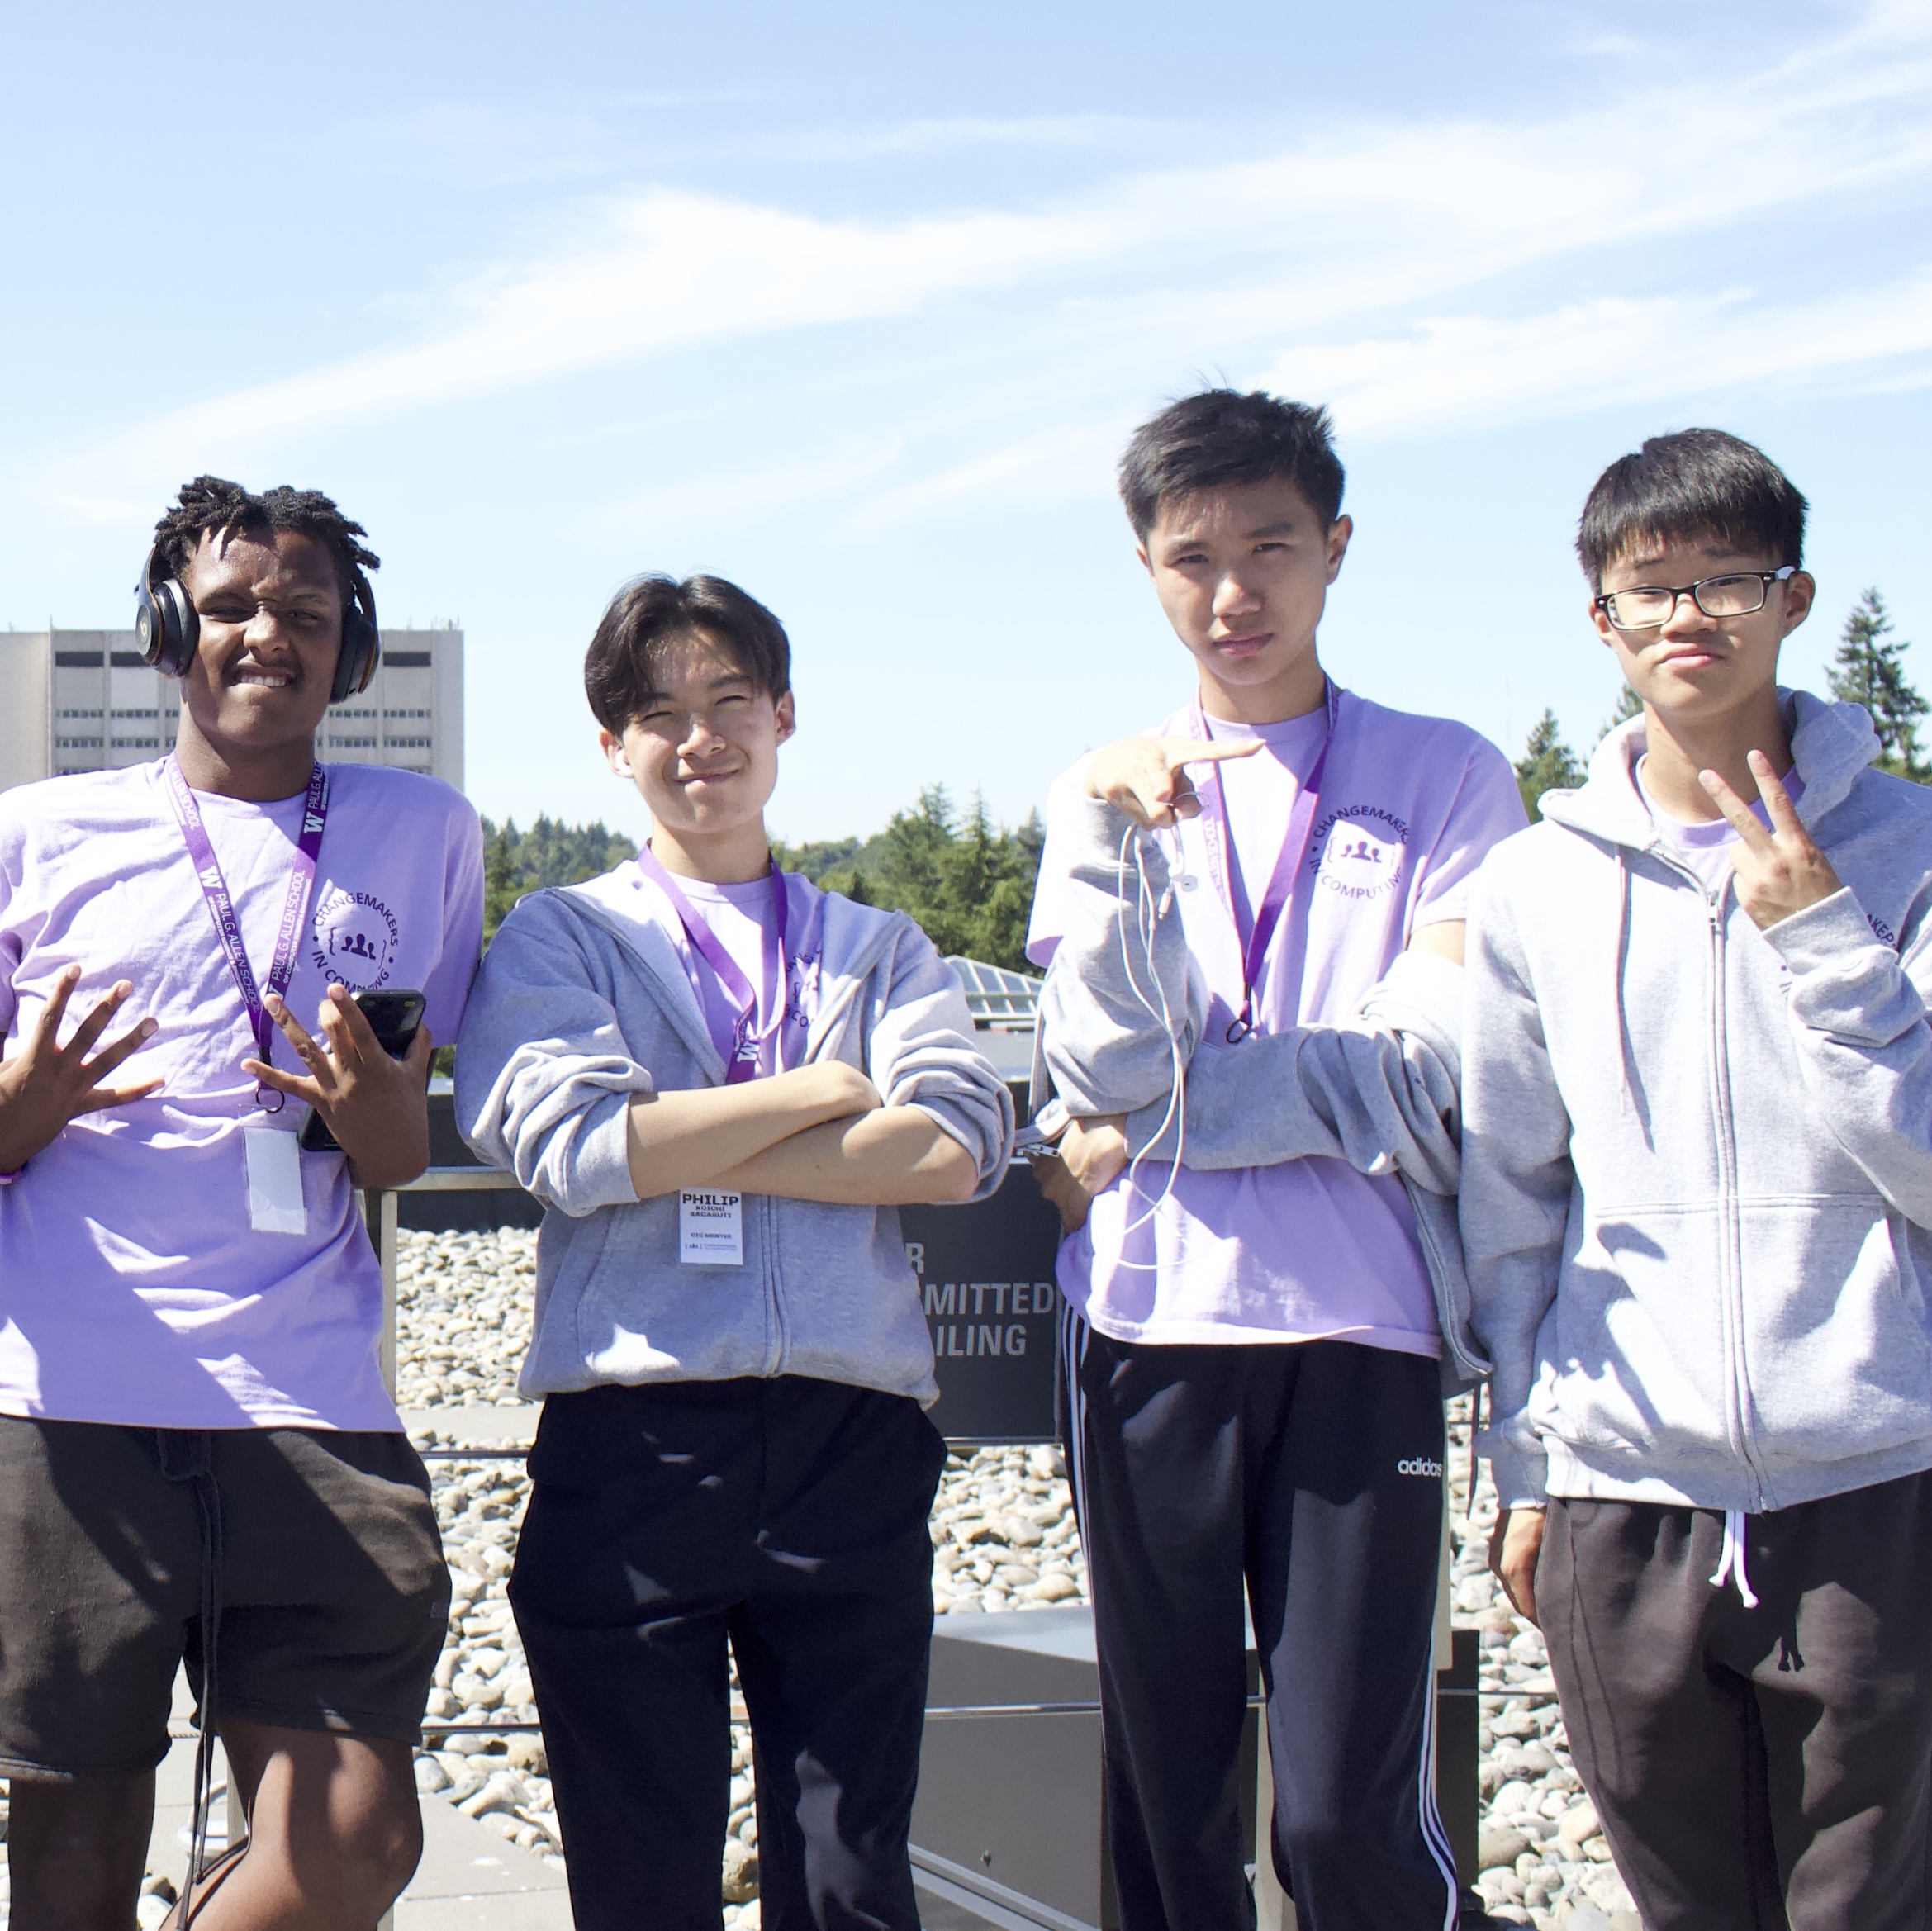 4 students in a relaxed pose showing peace signs with the open sky behind them